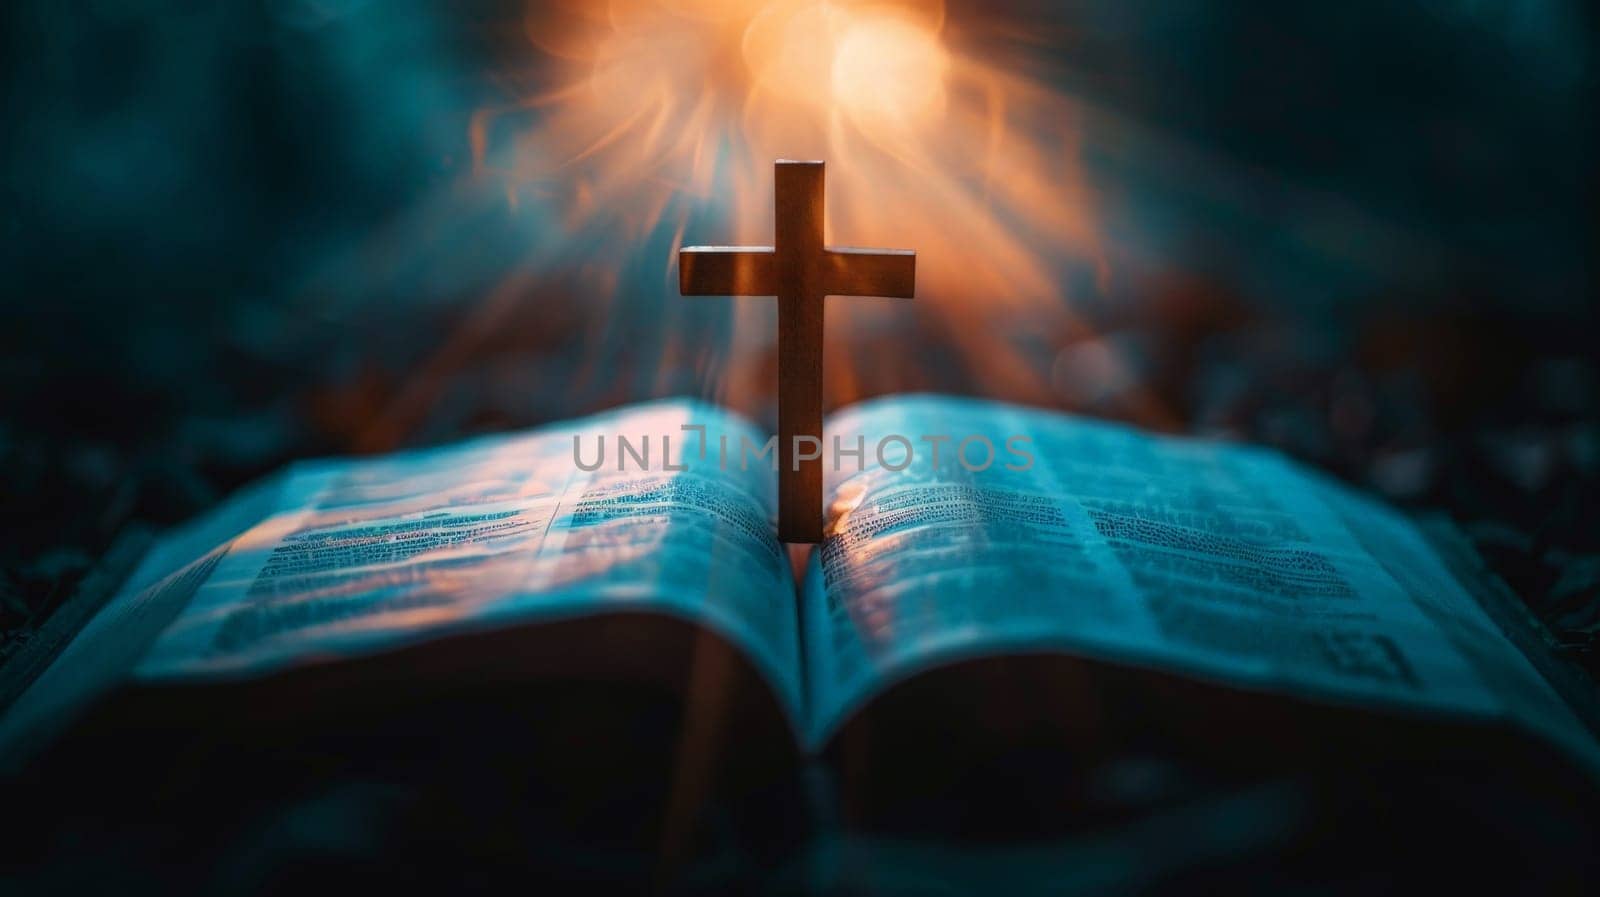 A Close-up of a Cross with an Inspiring Glow Emanating from an Open Bible.